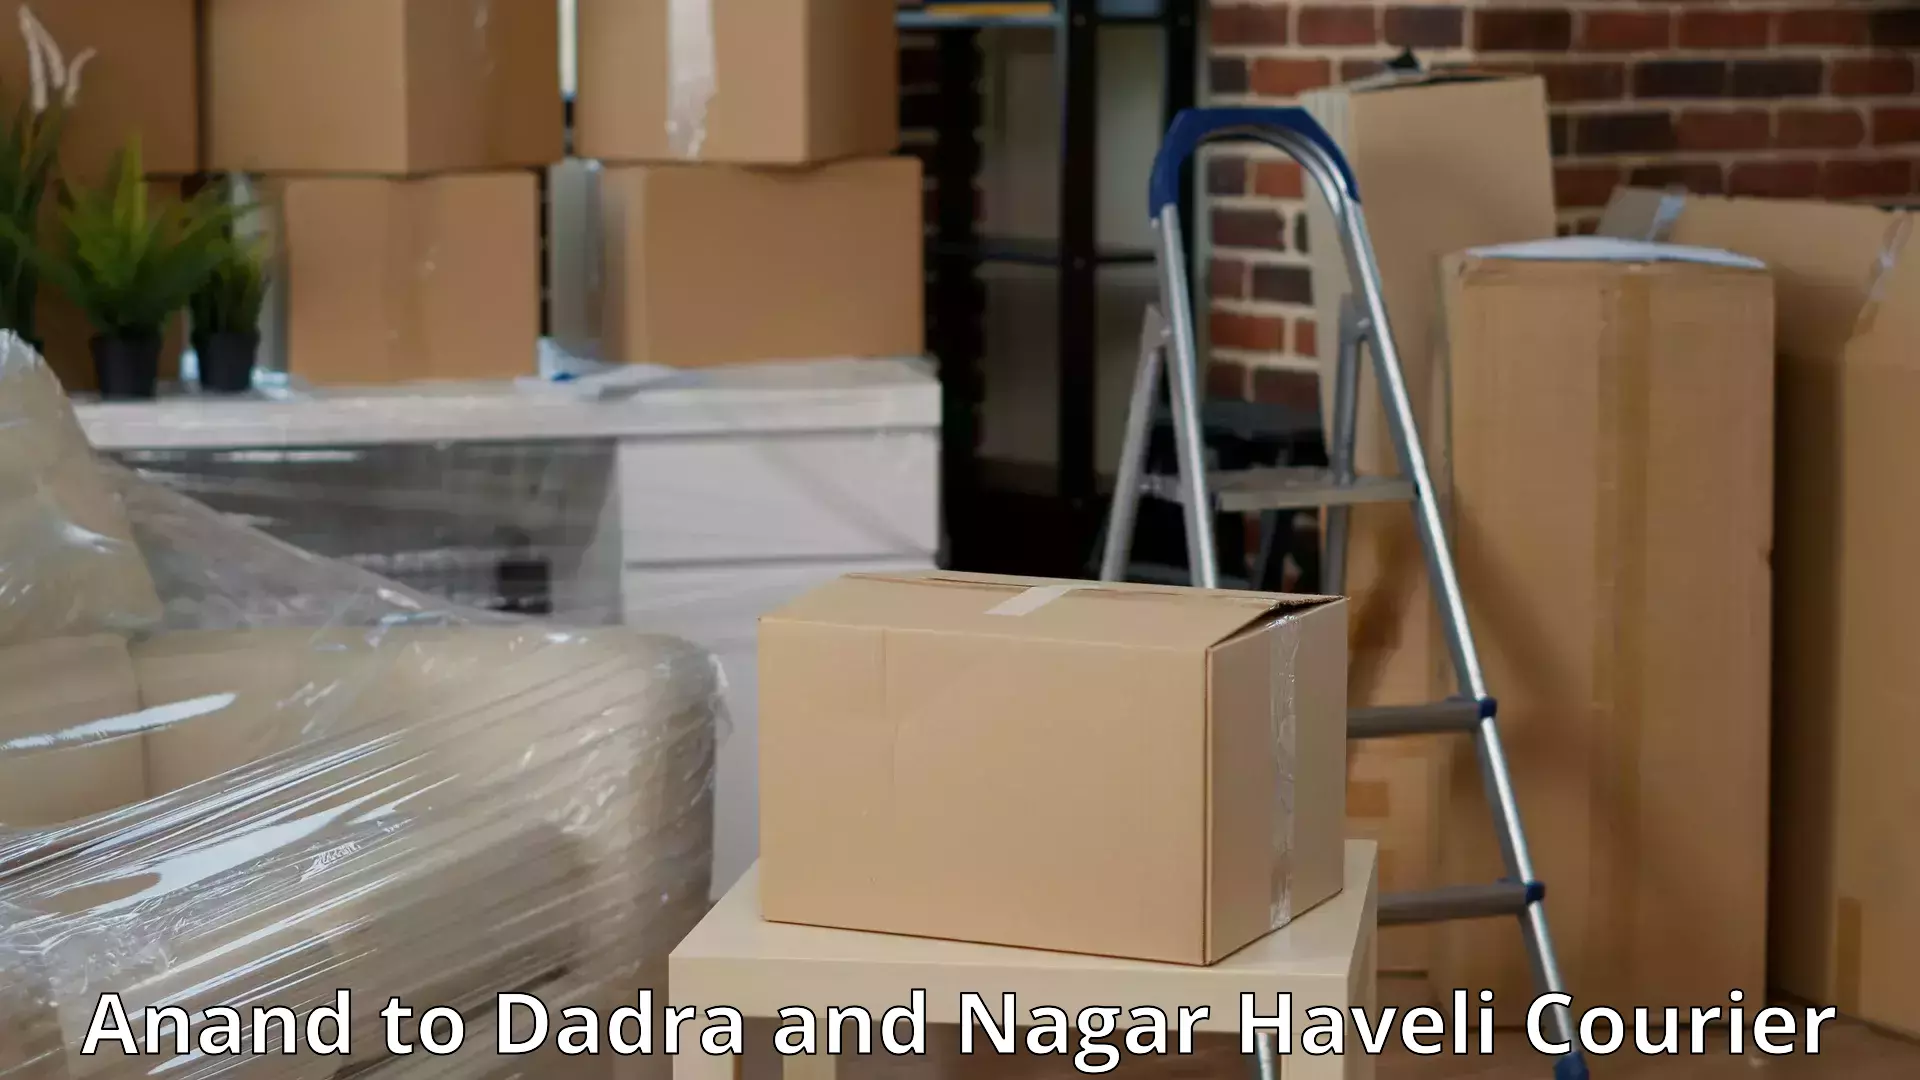 Efficient relocation services Anand to Dadra and Nagar Haveli